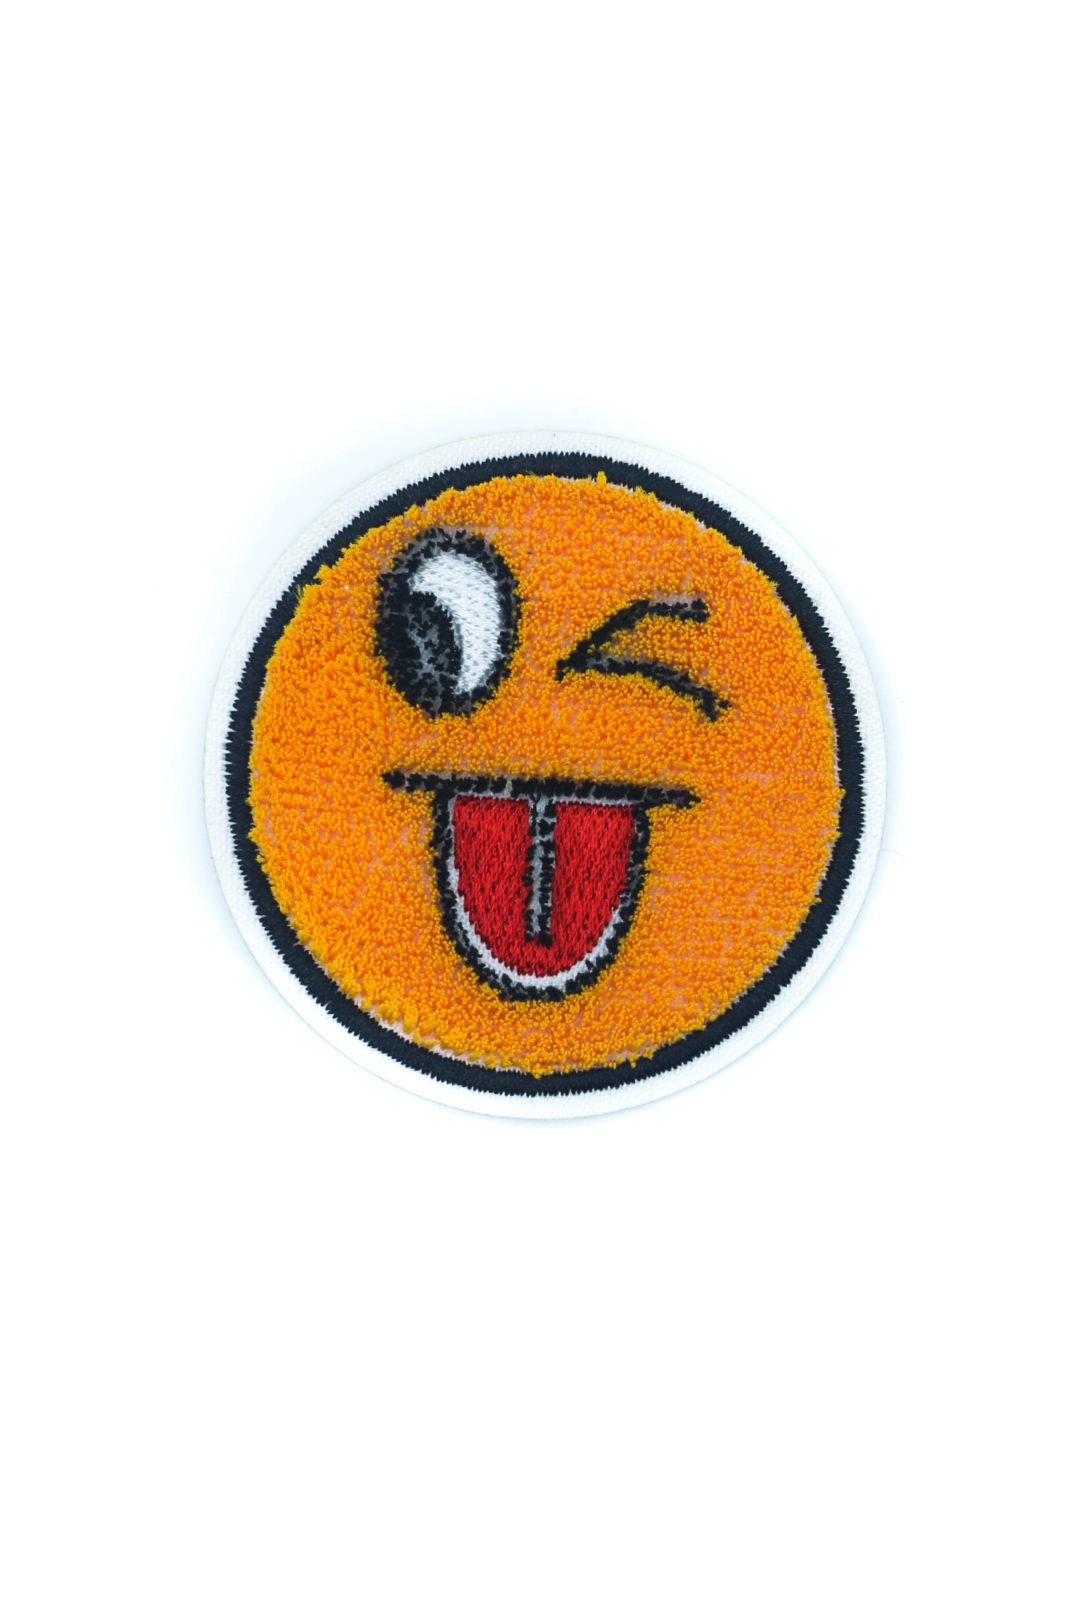 Smiley embroidered chenille iron on patches - Creo Piece